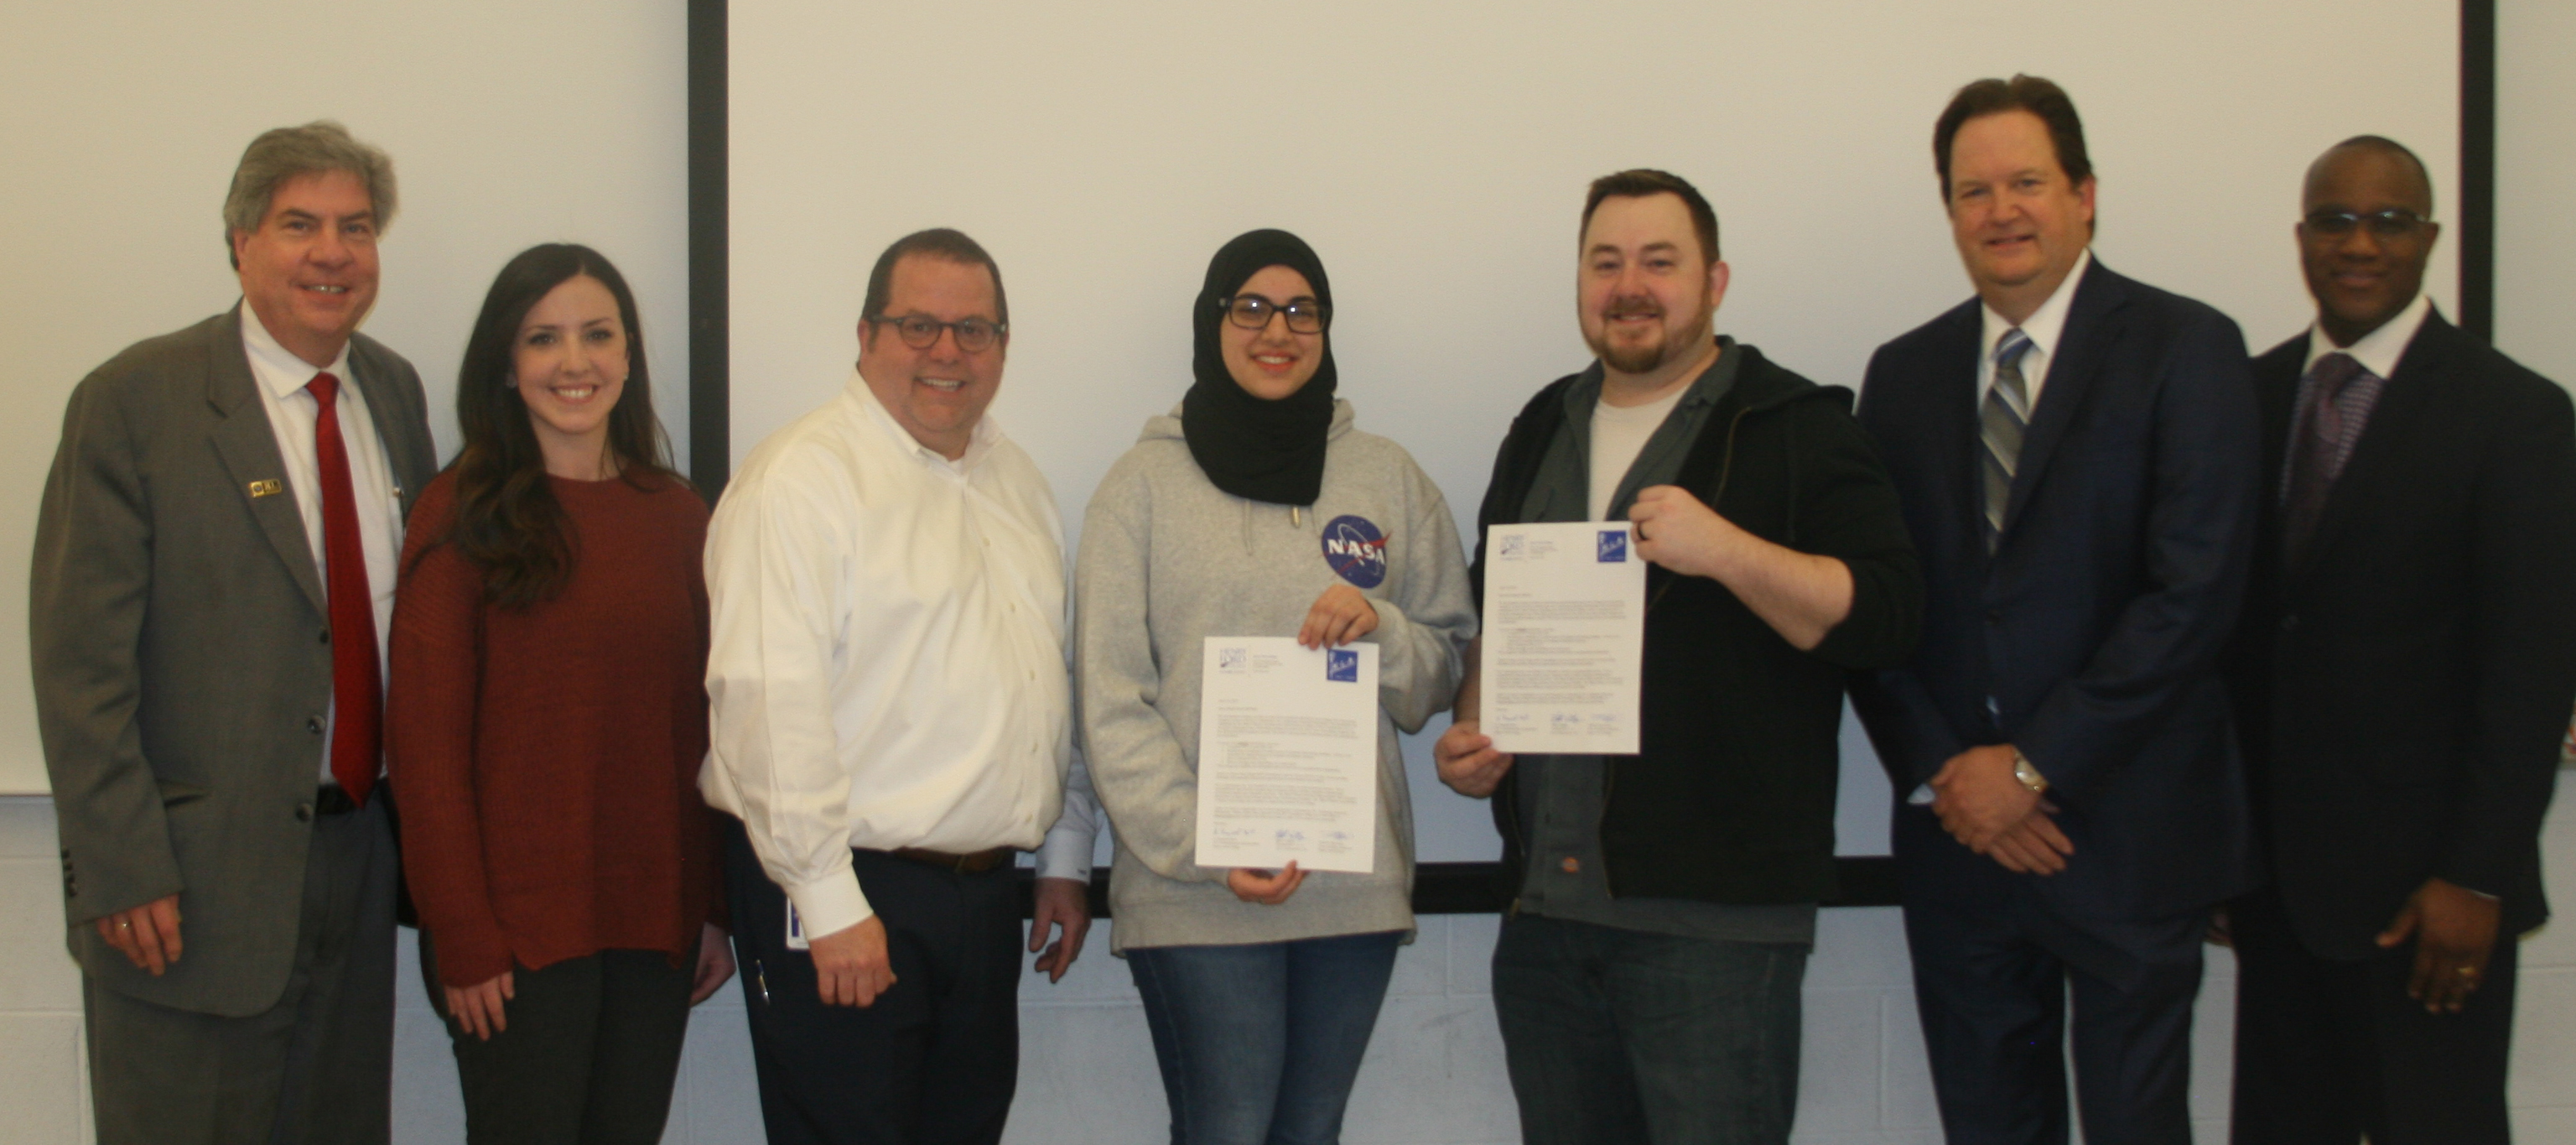 From left to right: Dr. Michael Nealon, HFC Vice President of Academic Affairs; Kelly Schoen, KLA Laboratories Marketing Coordinator; HFC Cisco lead instructor Todd Browning; scholarship winner Zainab Mroue; scholarship winner Kyle Harper; KLA Laboratori